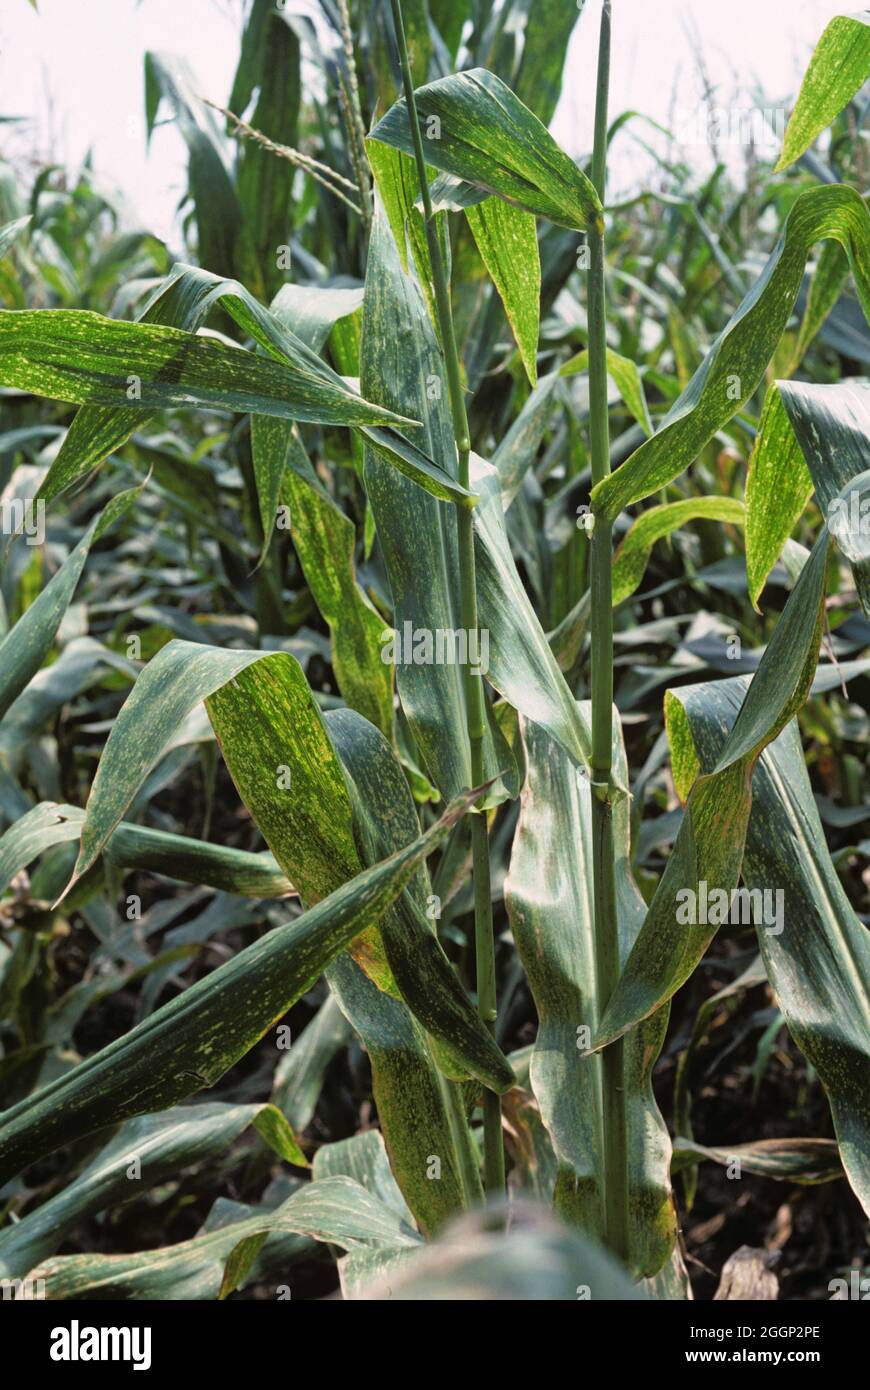 Maize eyespot (Kabatiella zeae) fungal disease infection and lesions on maize or corn leaves on a maturing plant, Illinois, USA Stock Photo